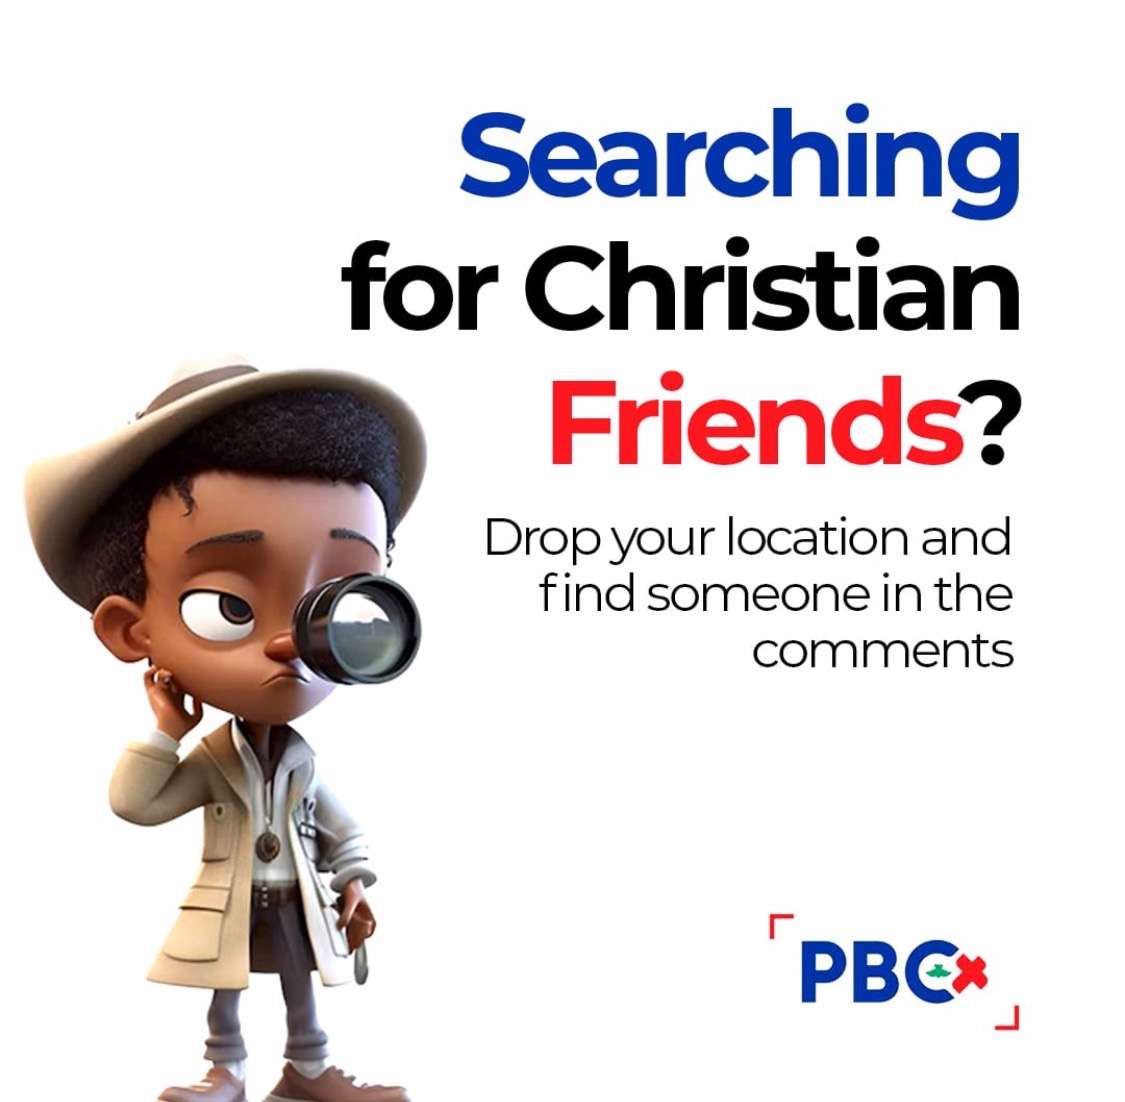 Seeking fellowship with fellow believers who uplift and inspire. Let's journey together in faith and friendship!

Dm us or drop your details below

#ChristianCommunity #FaithInAction
#YearofUnendingCelebrations #PBCGlobal #RCCG #GlobalChurch